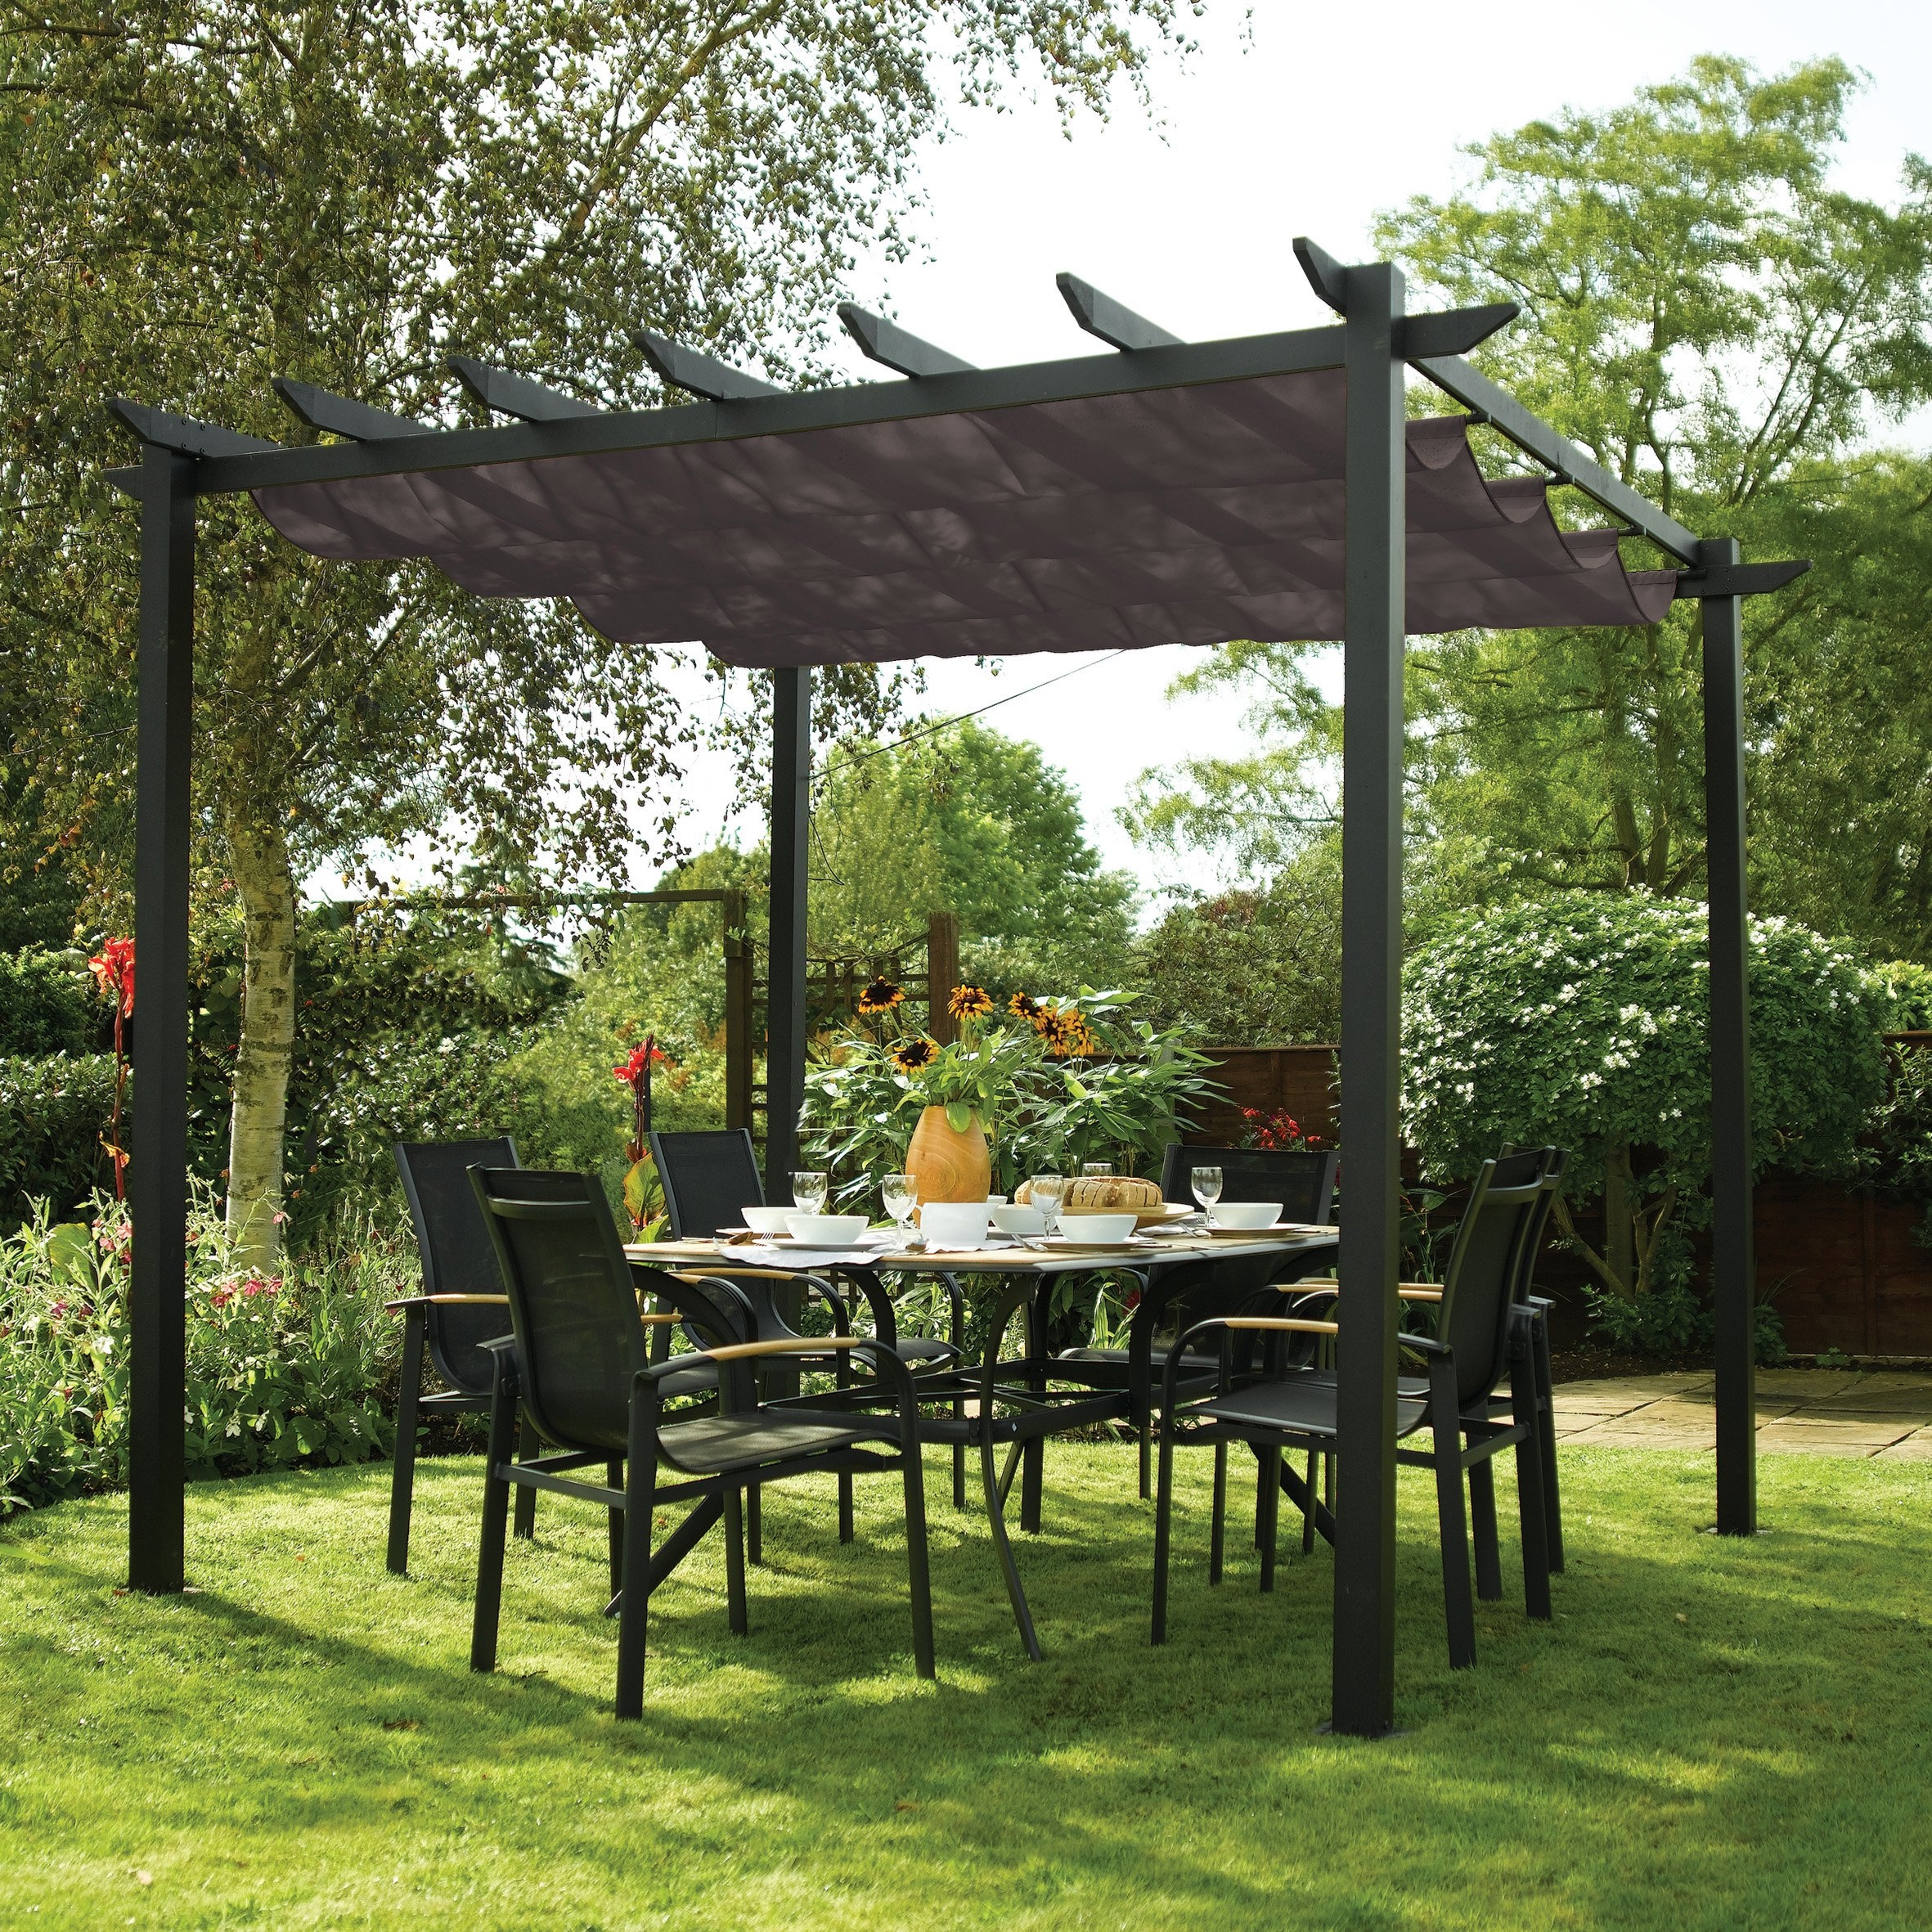 The Cuba Grey Free Standing Canopy